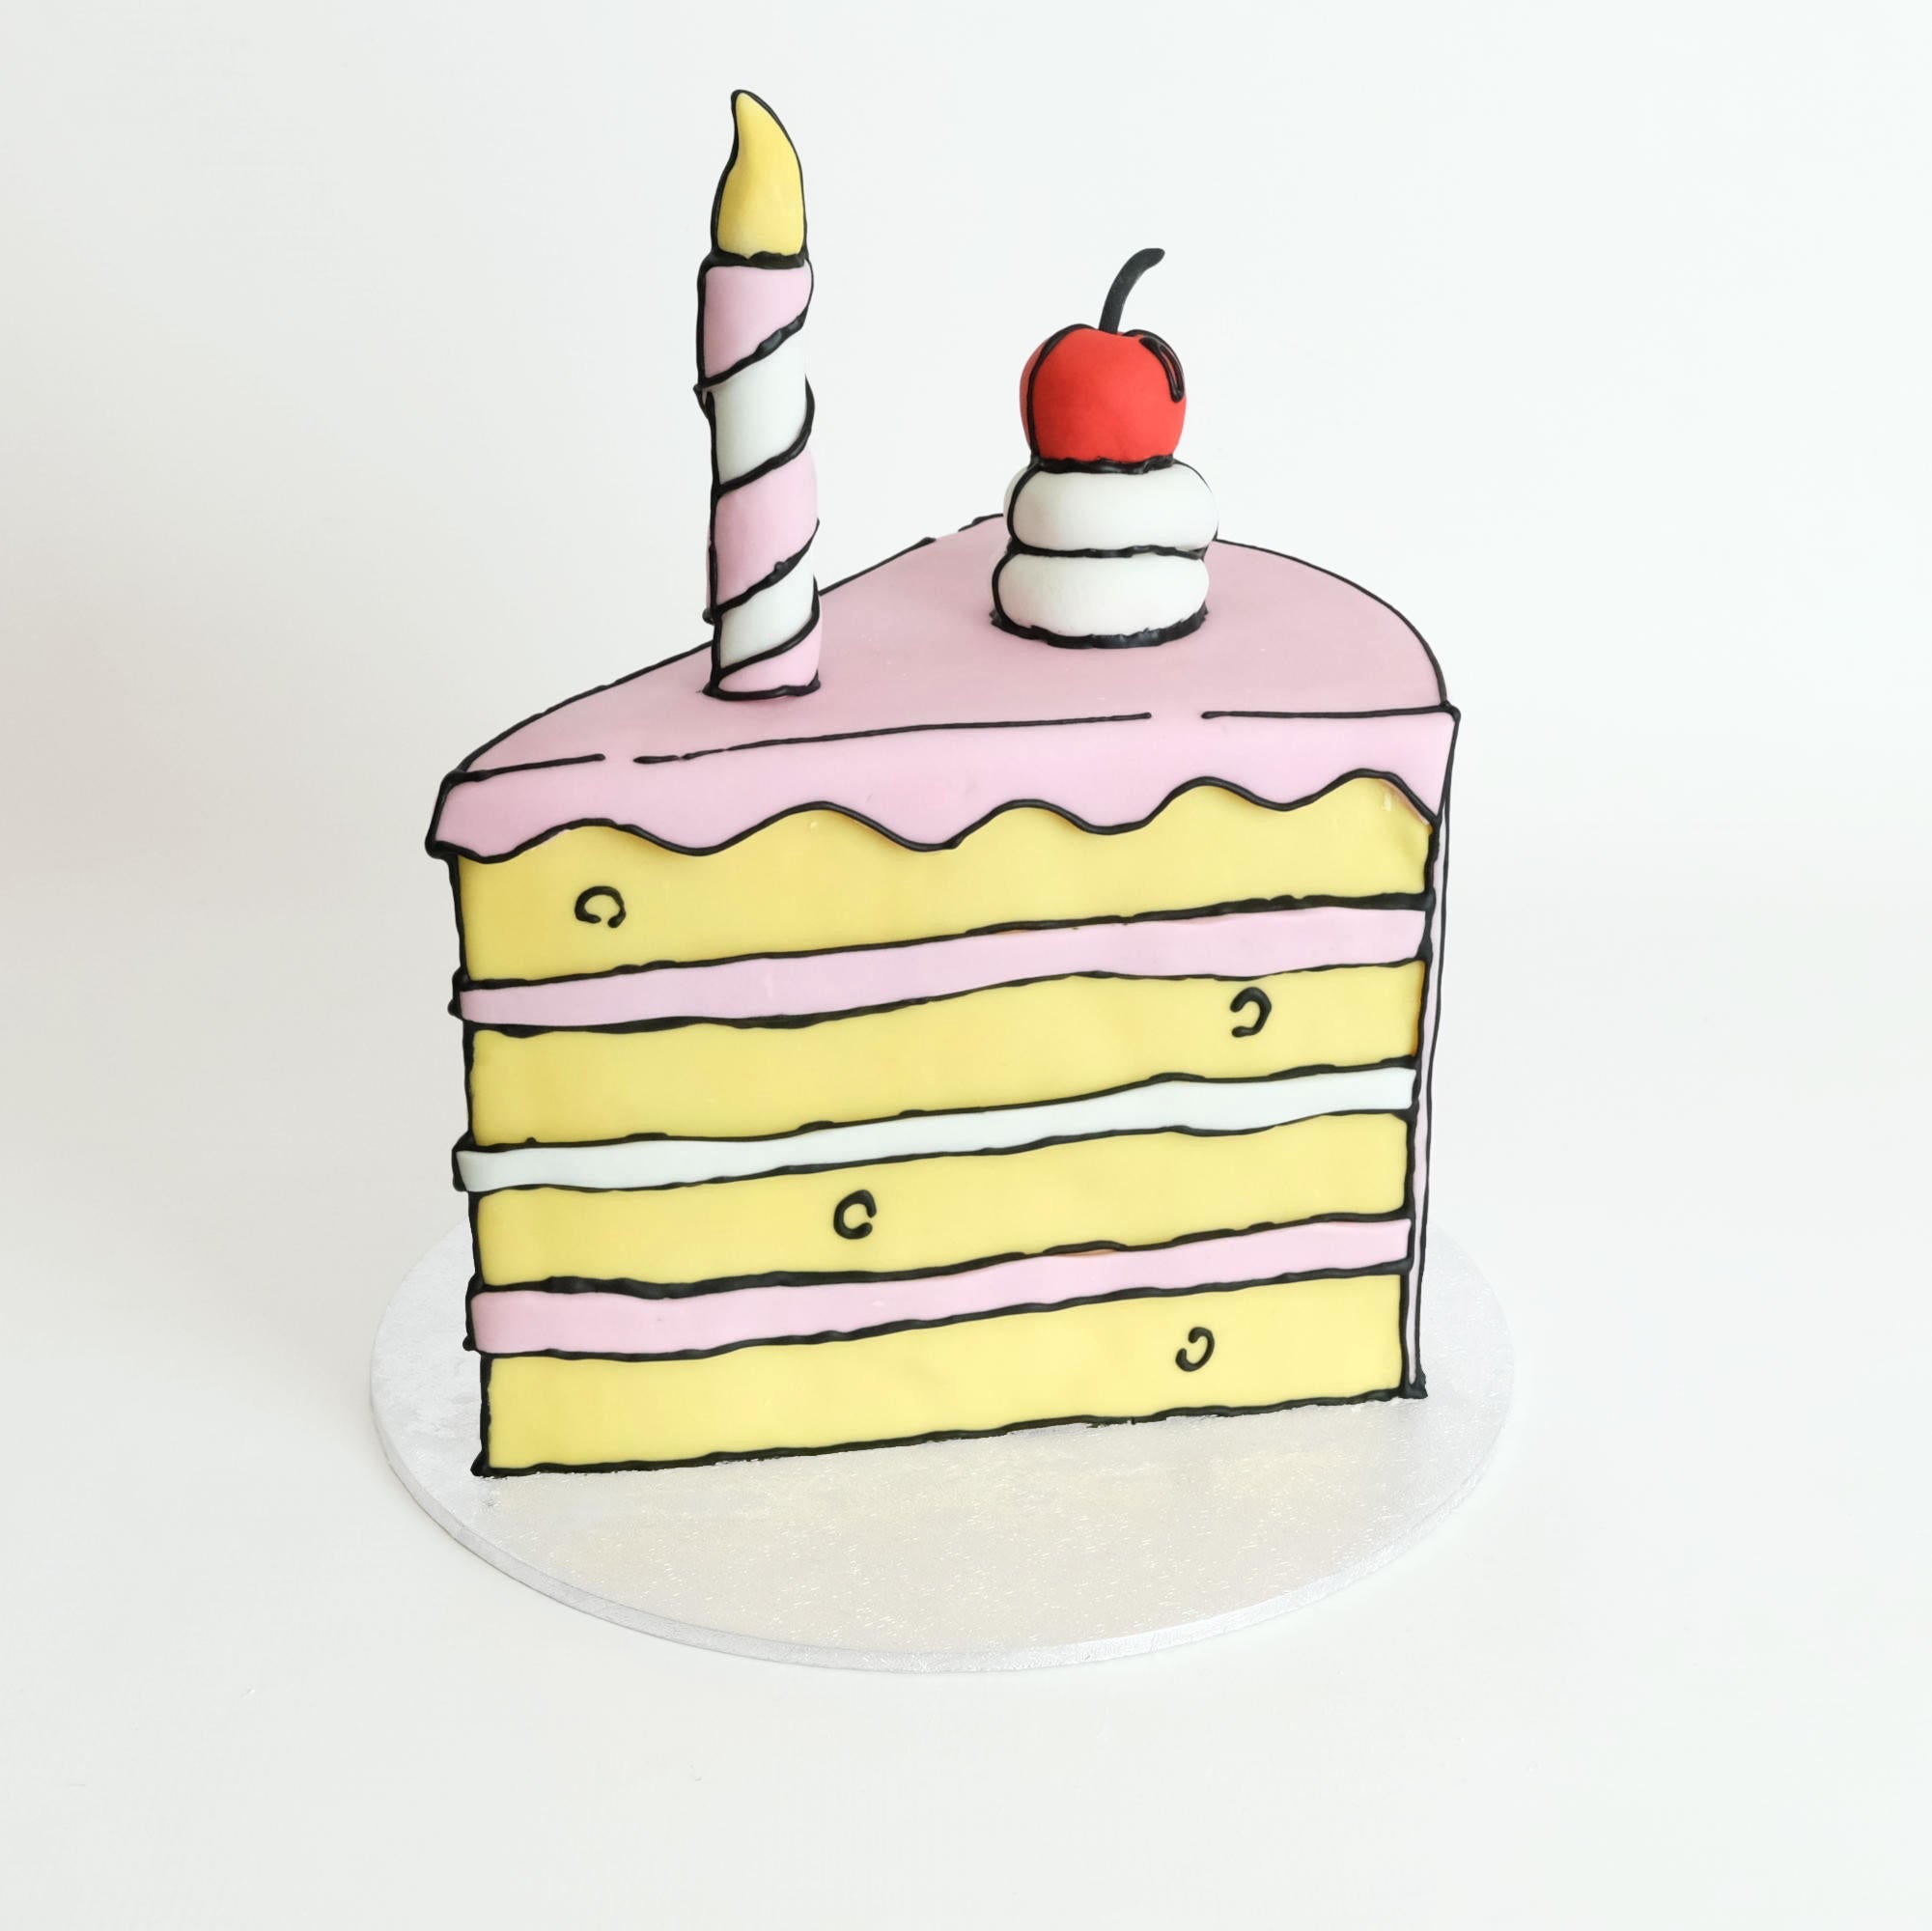 Happy Birthday Cake with Candles - animated GIF — Download on Funimada.com